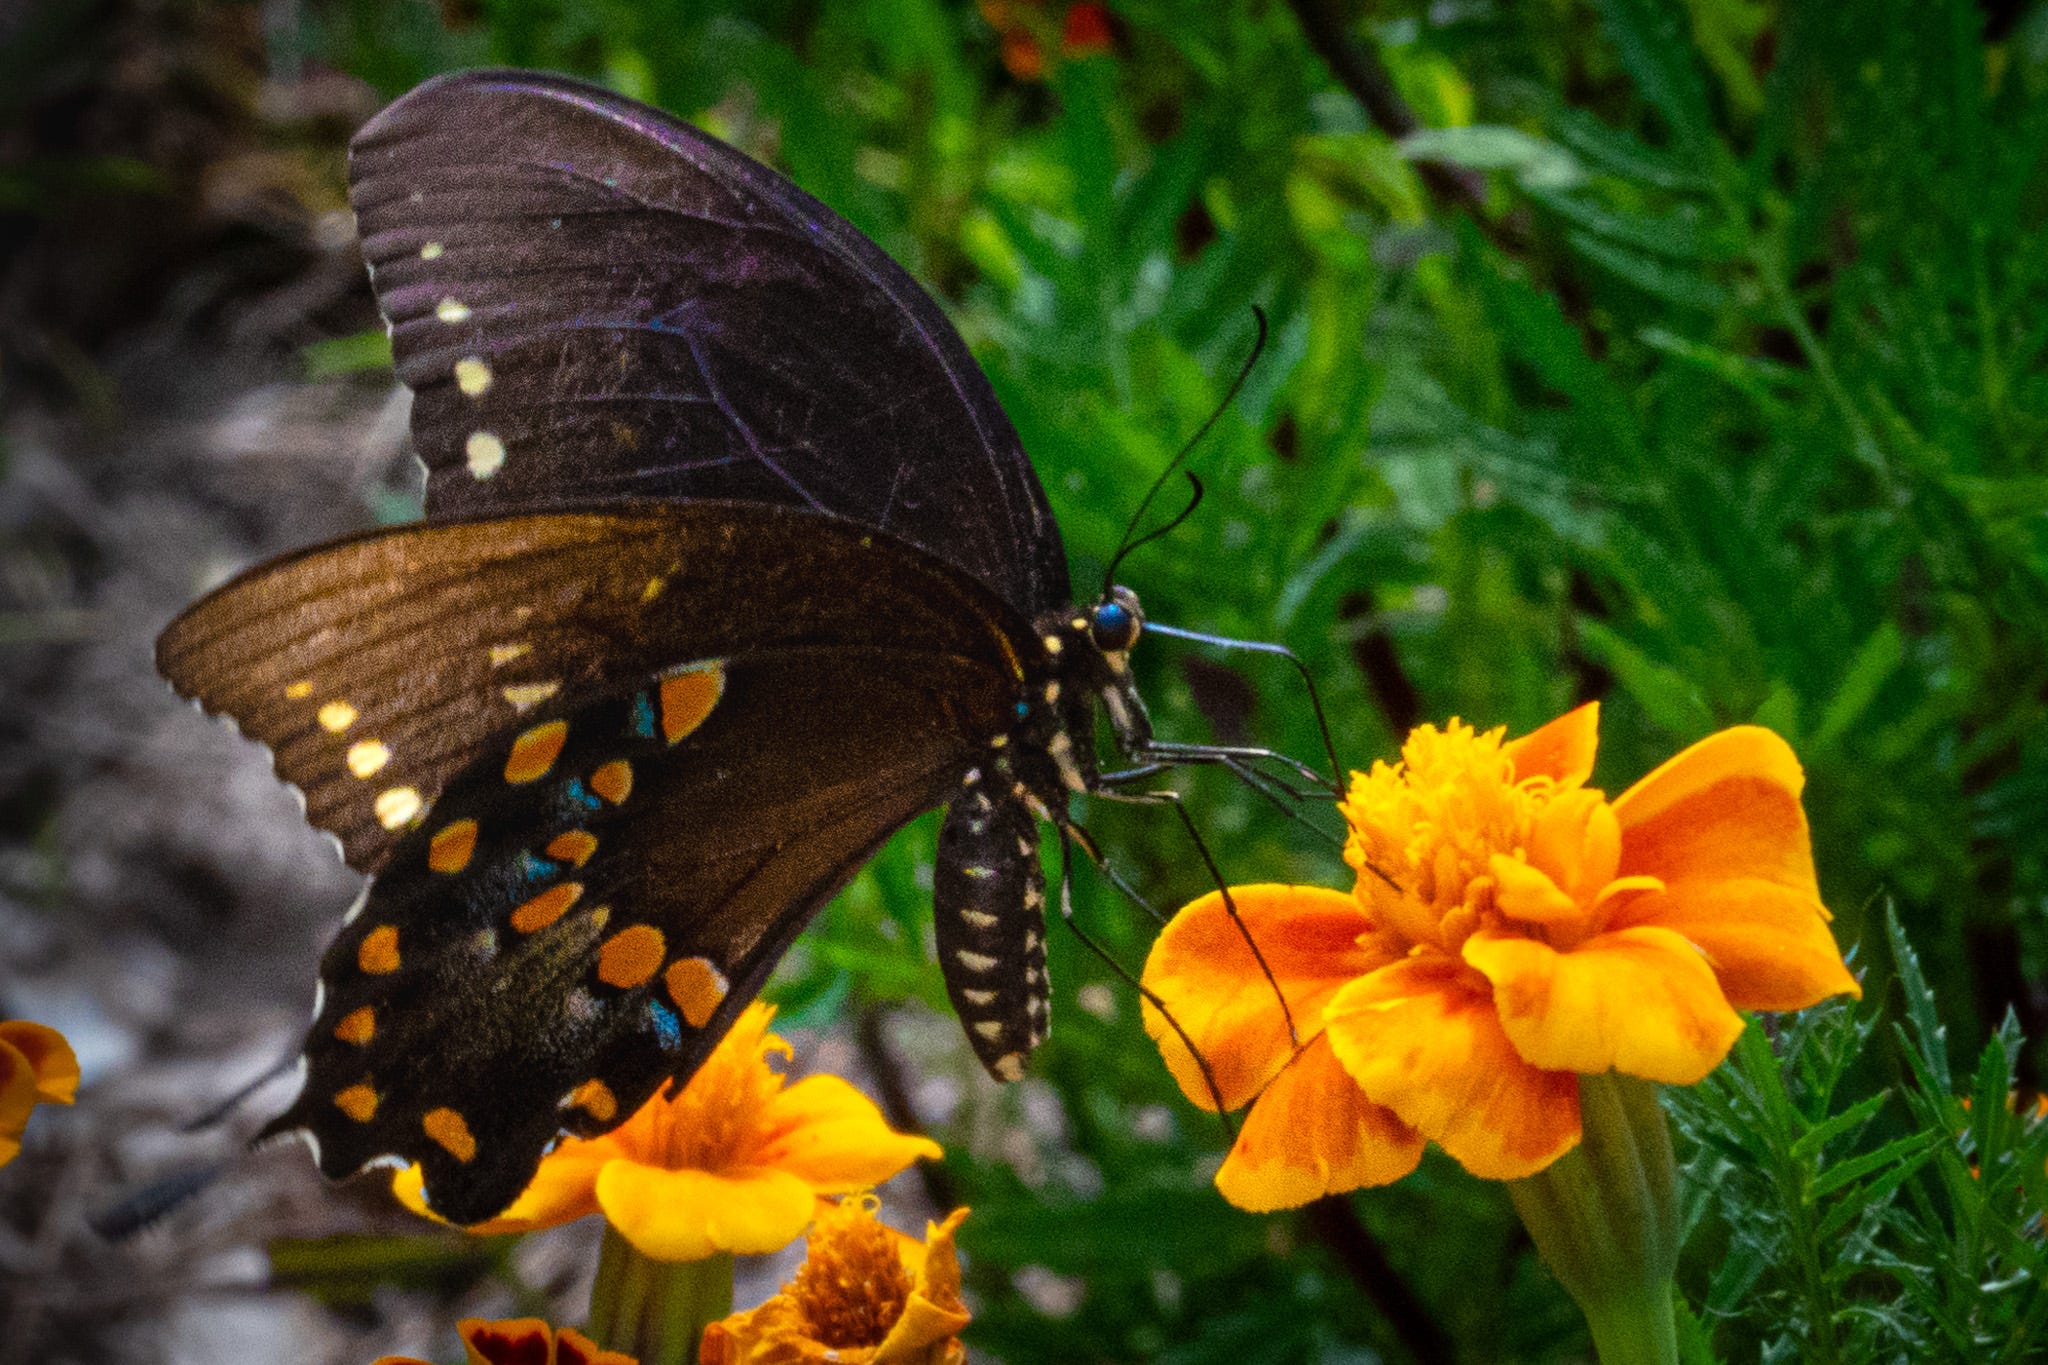 A Swallow Tail butterfly on a orange French marigold